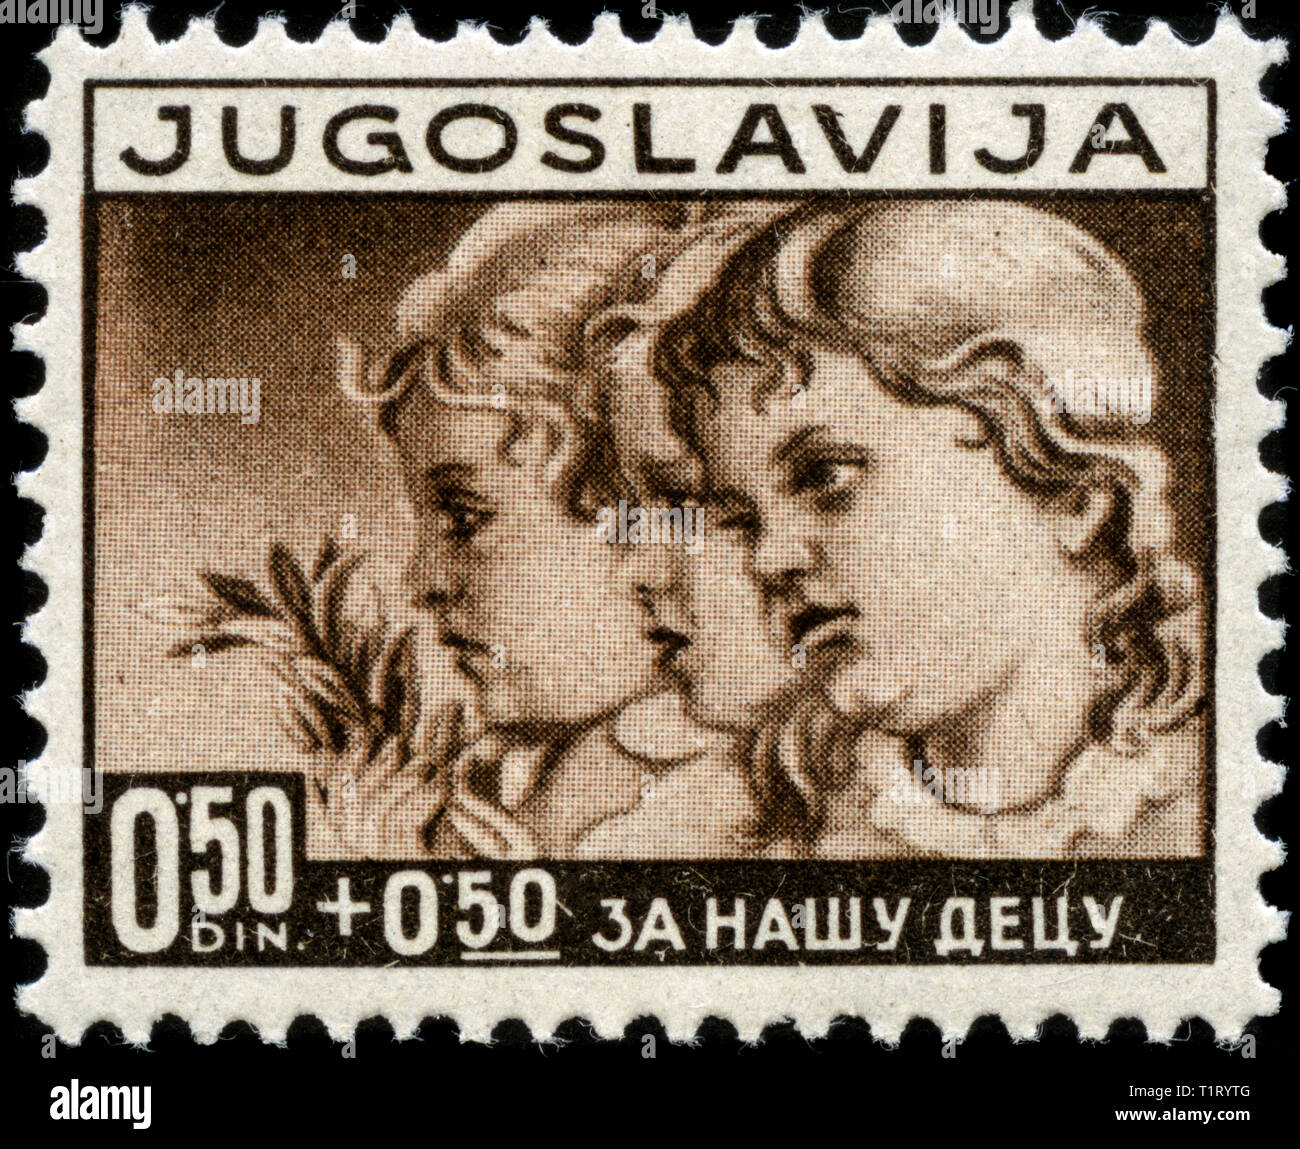 Postage stamp from the former state of Yugoslavia in the Children help series issued in 1938 Stock Photo